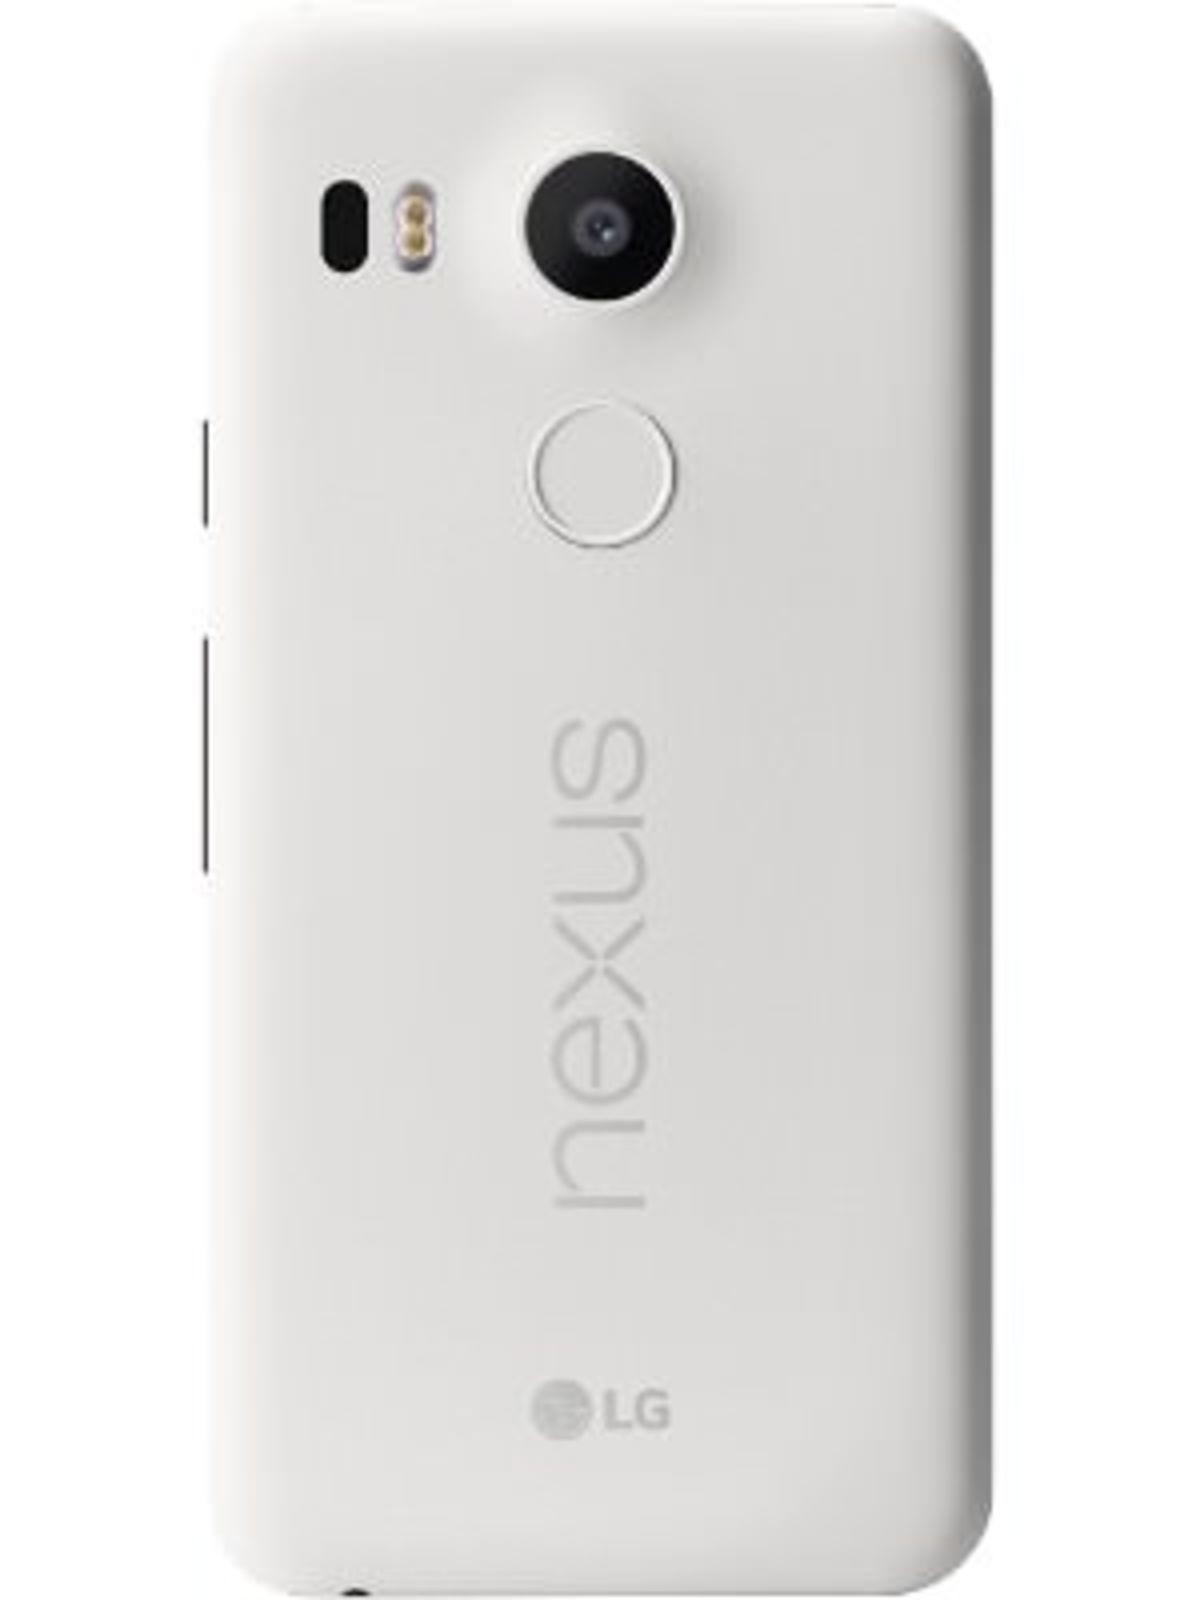 Google Nexus 5X 16GB Price in India, Full Specifications (12th Jan 2023) at  Gadgets Now